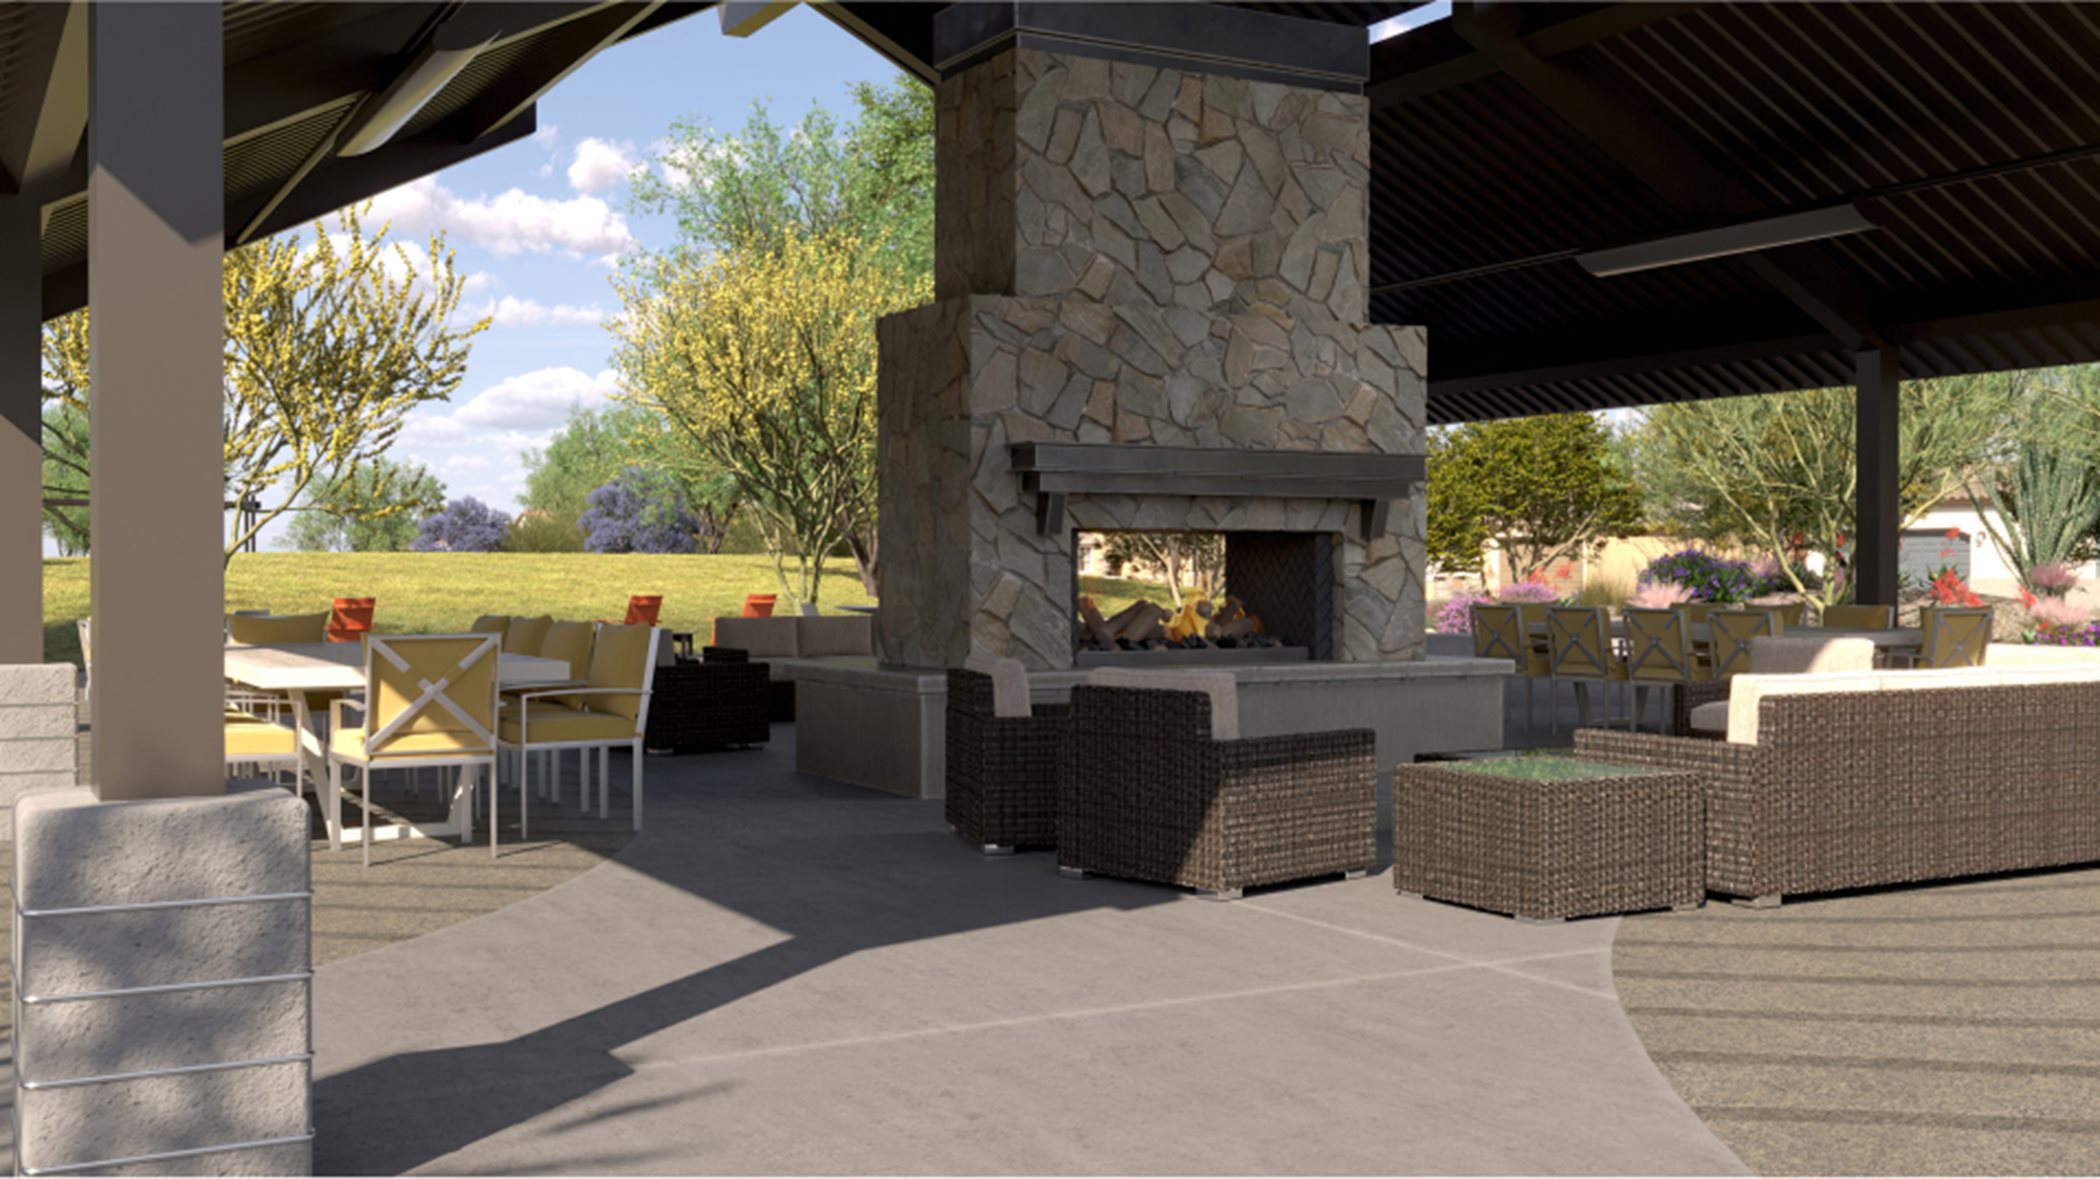 Shaded picnic area with fireplace